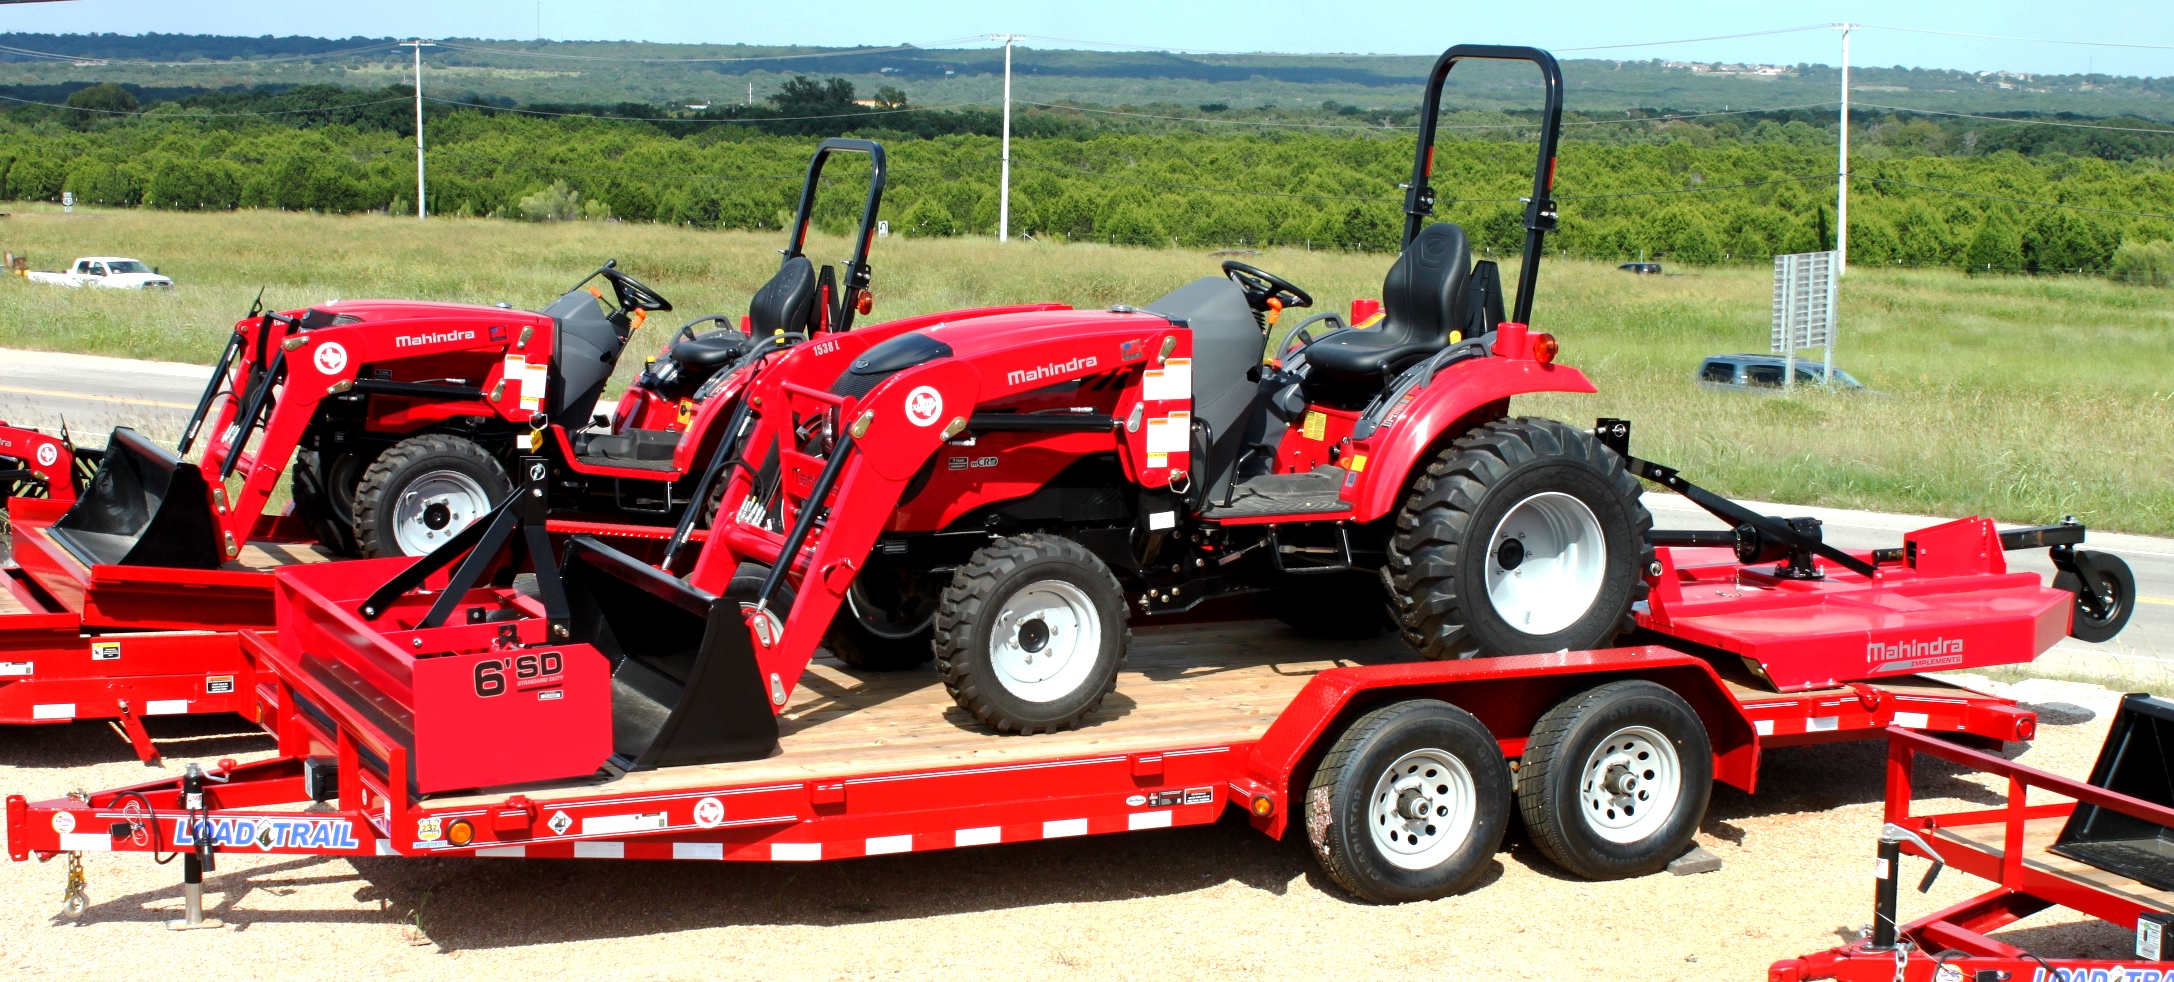 New Mahindra Tractor, Implement and Load Trail trailer package for sale in Reid's Triple T, Leander, Texas